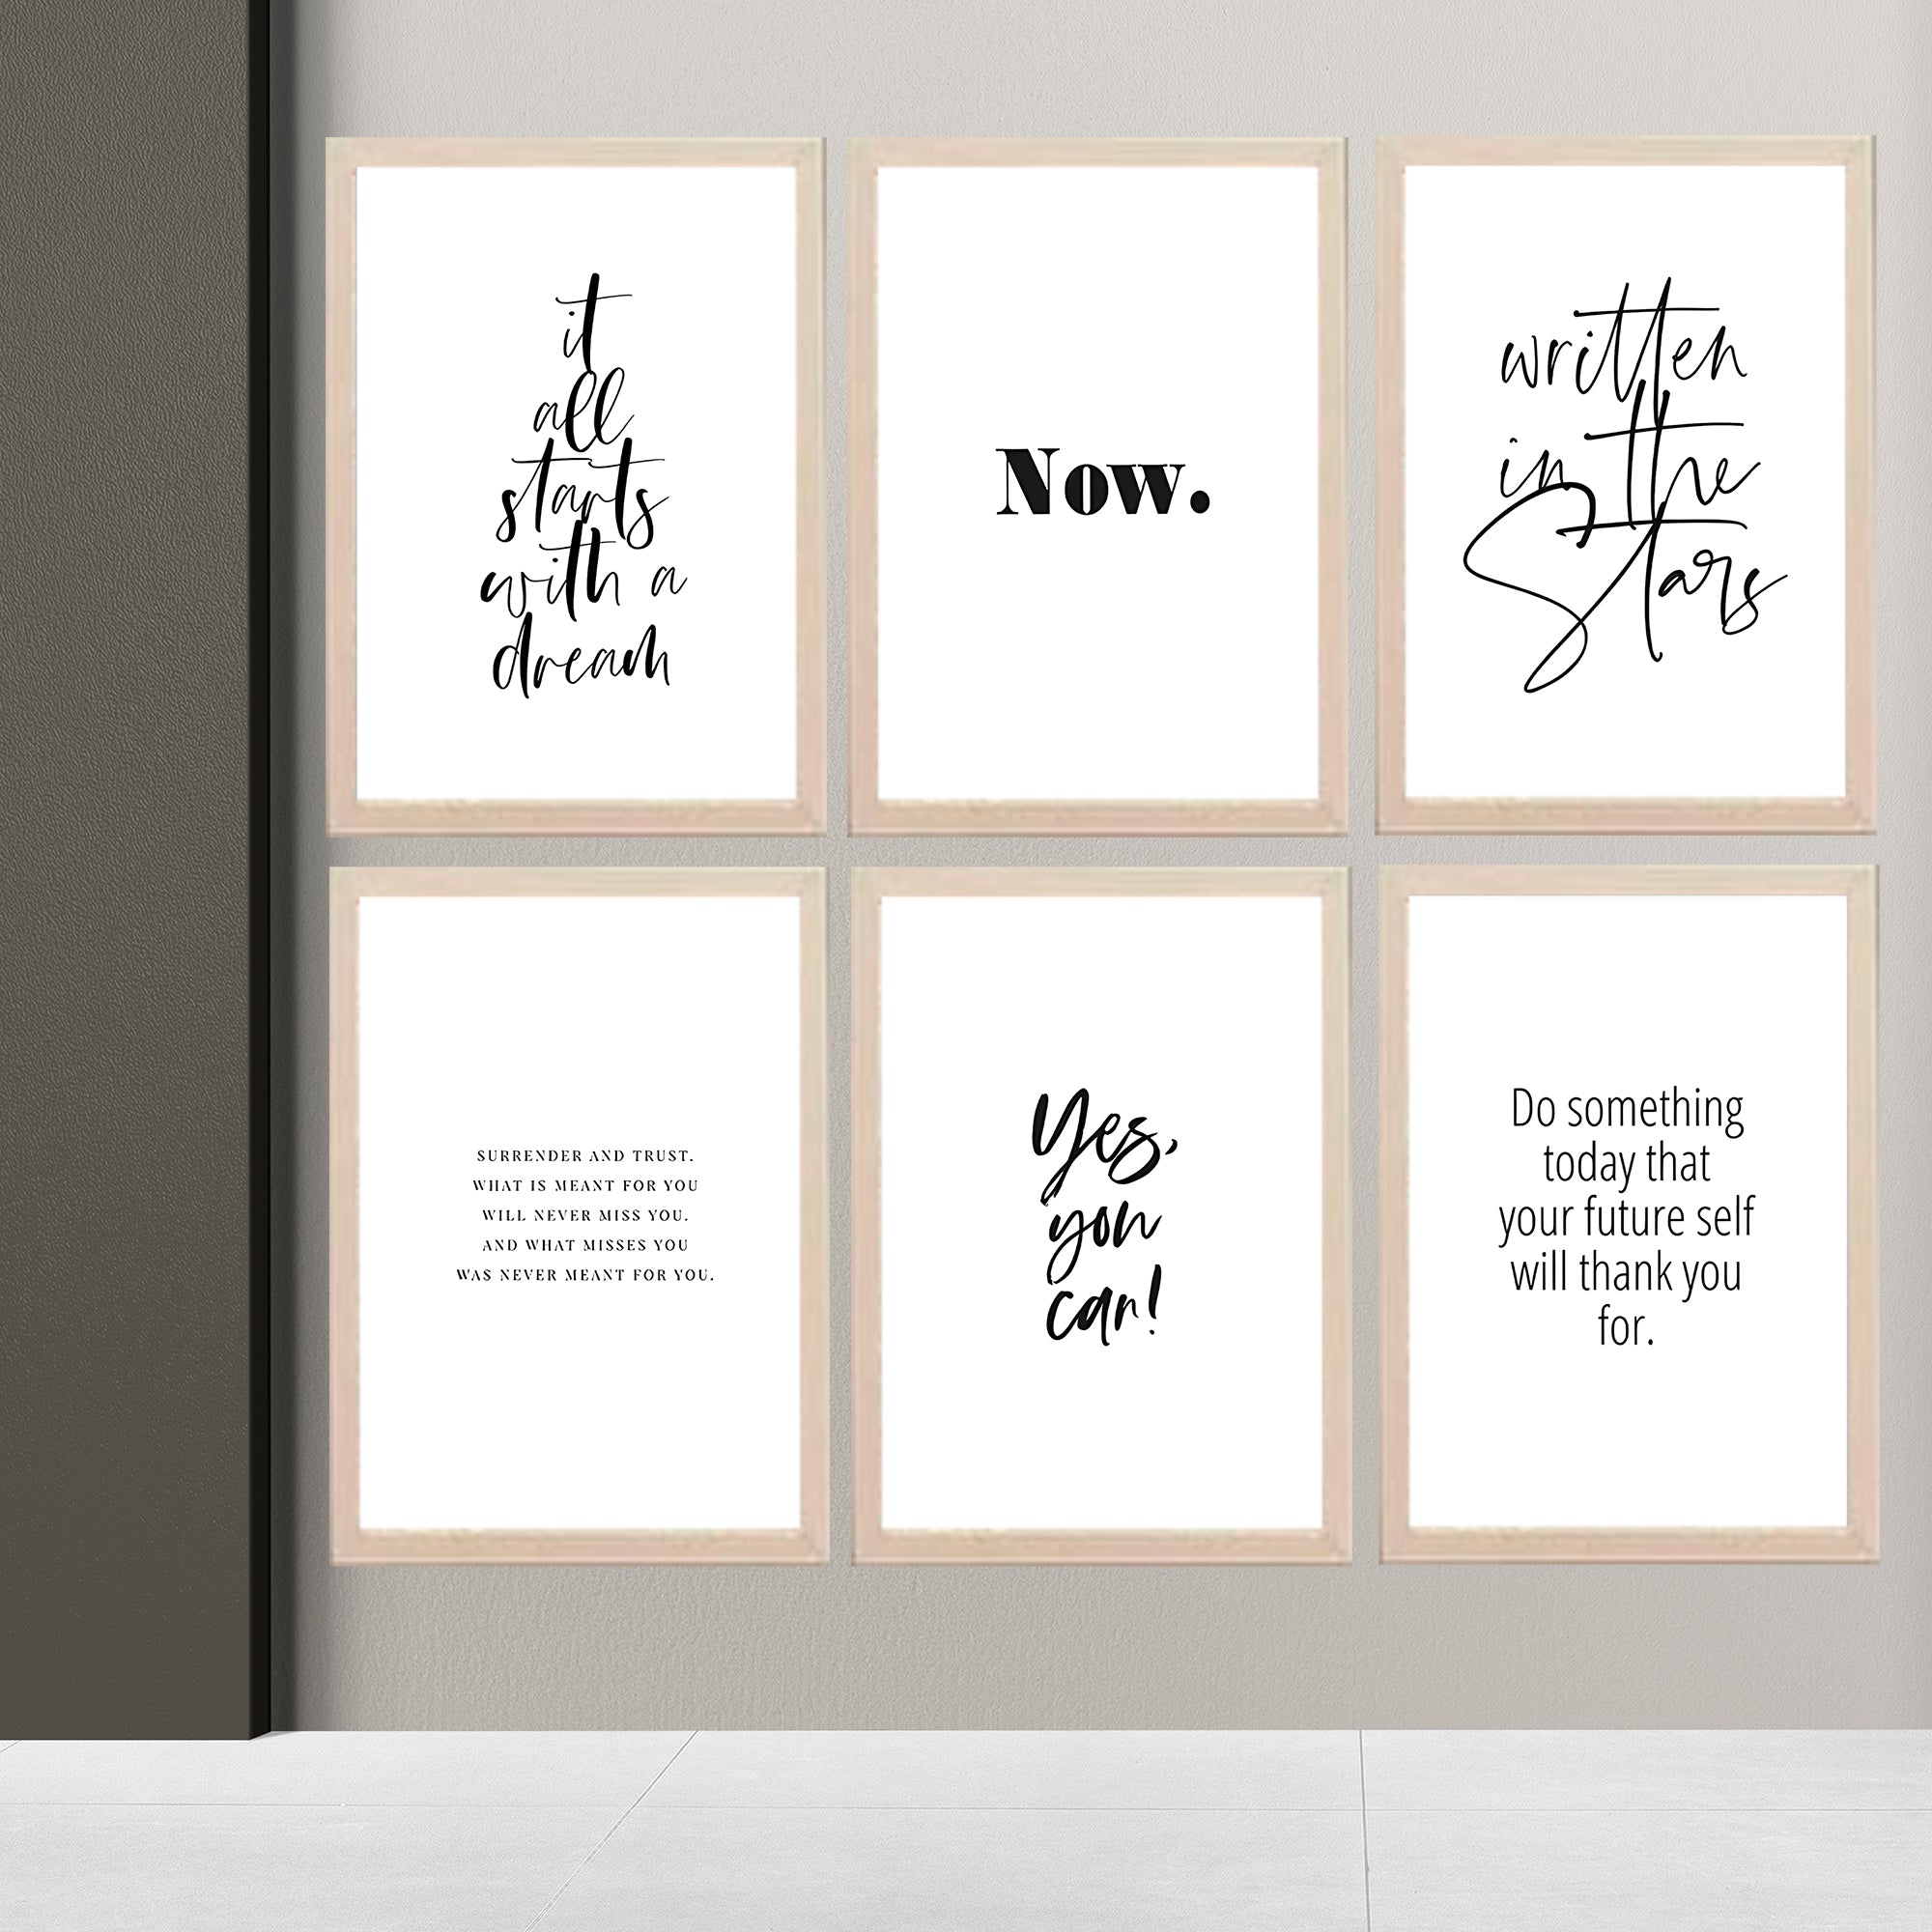 Buy white Business / Work Motivation Qoutes For Home And Offices Set of 6